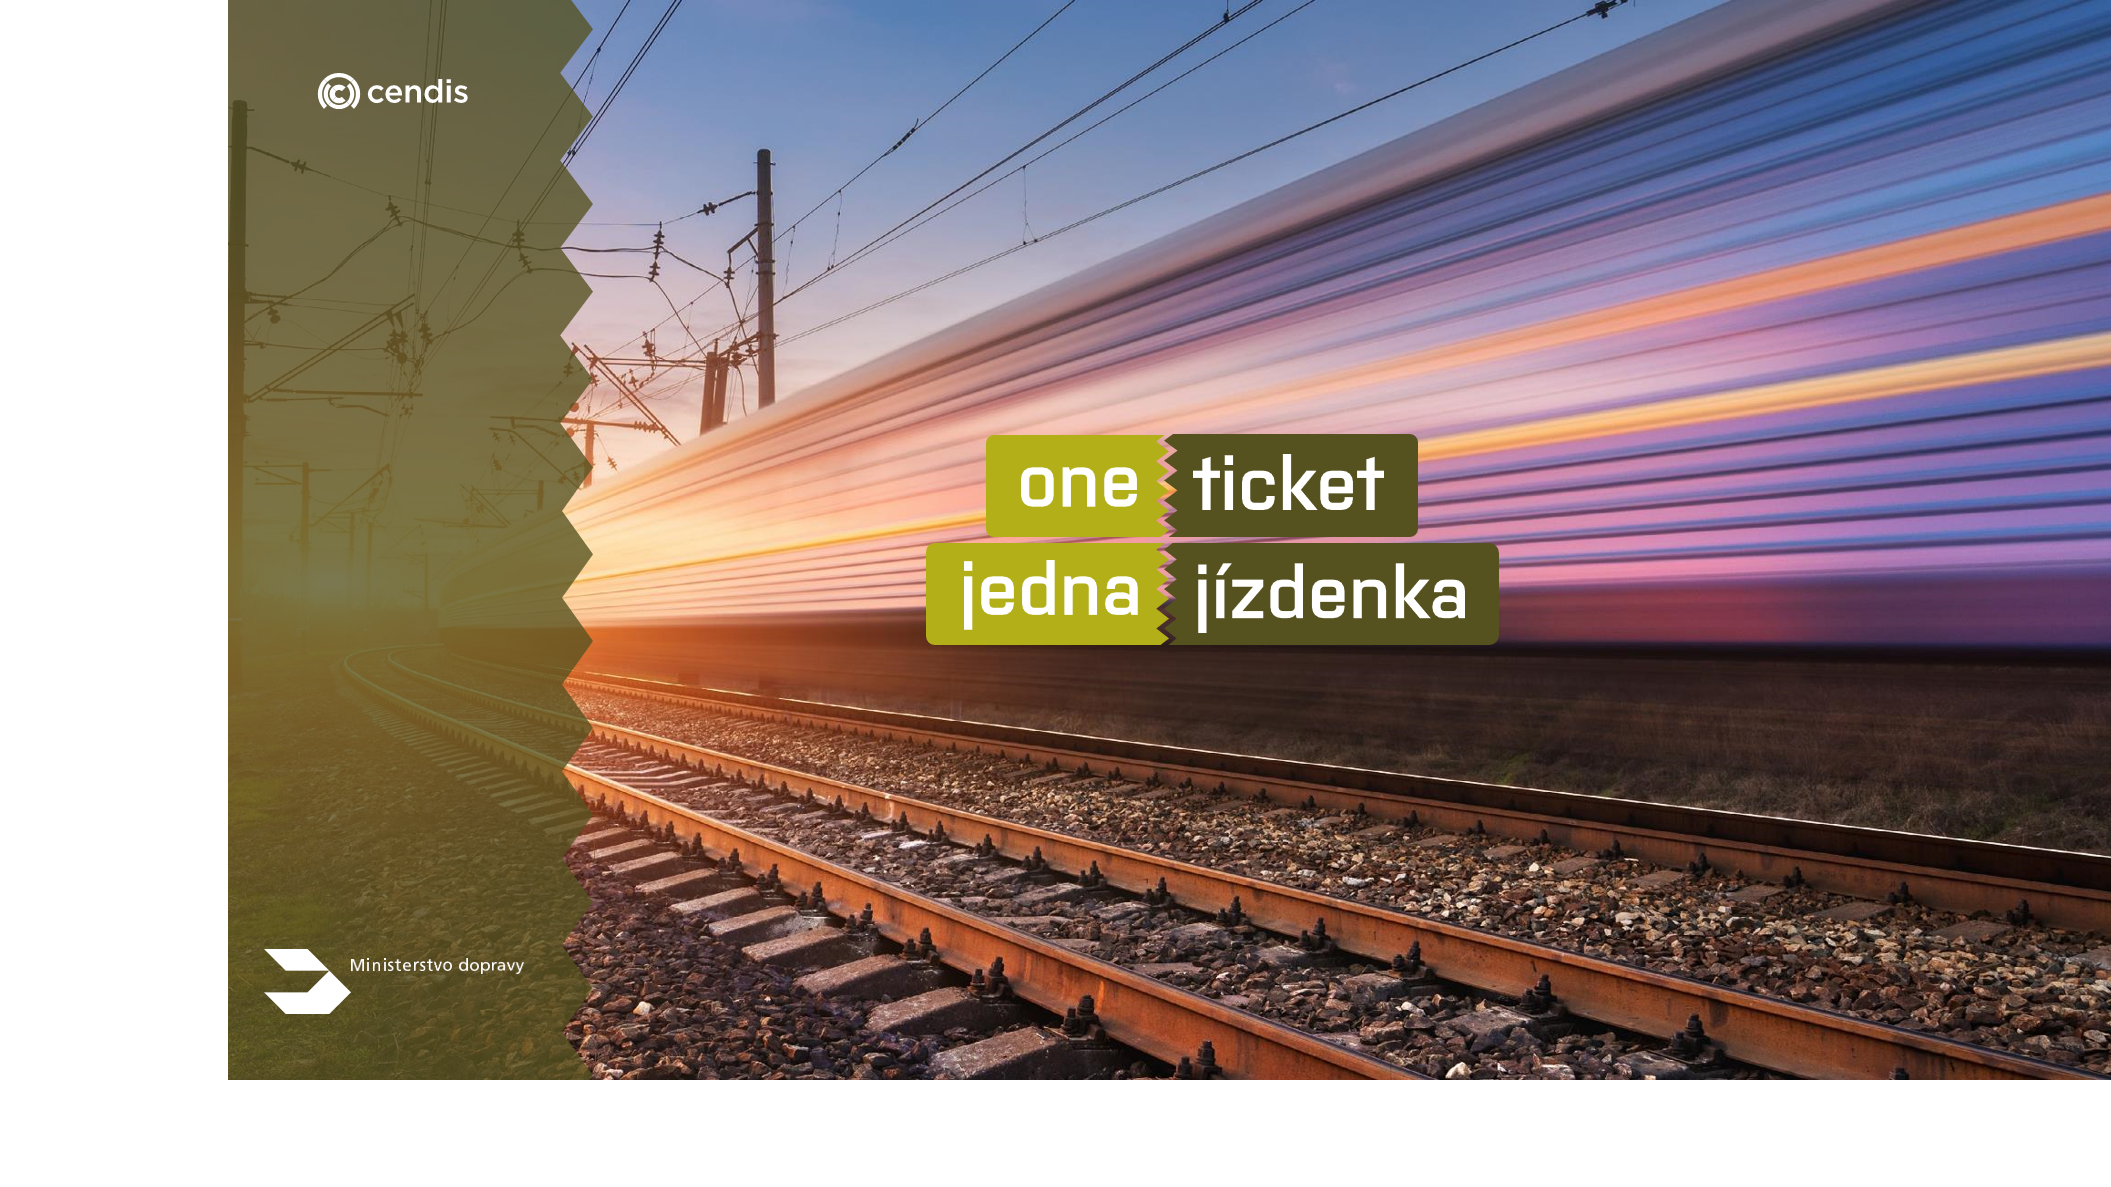 OneTicket is available in the app or the e-shop, it is being tested in the Pilsen and Č. Lípa region